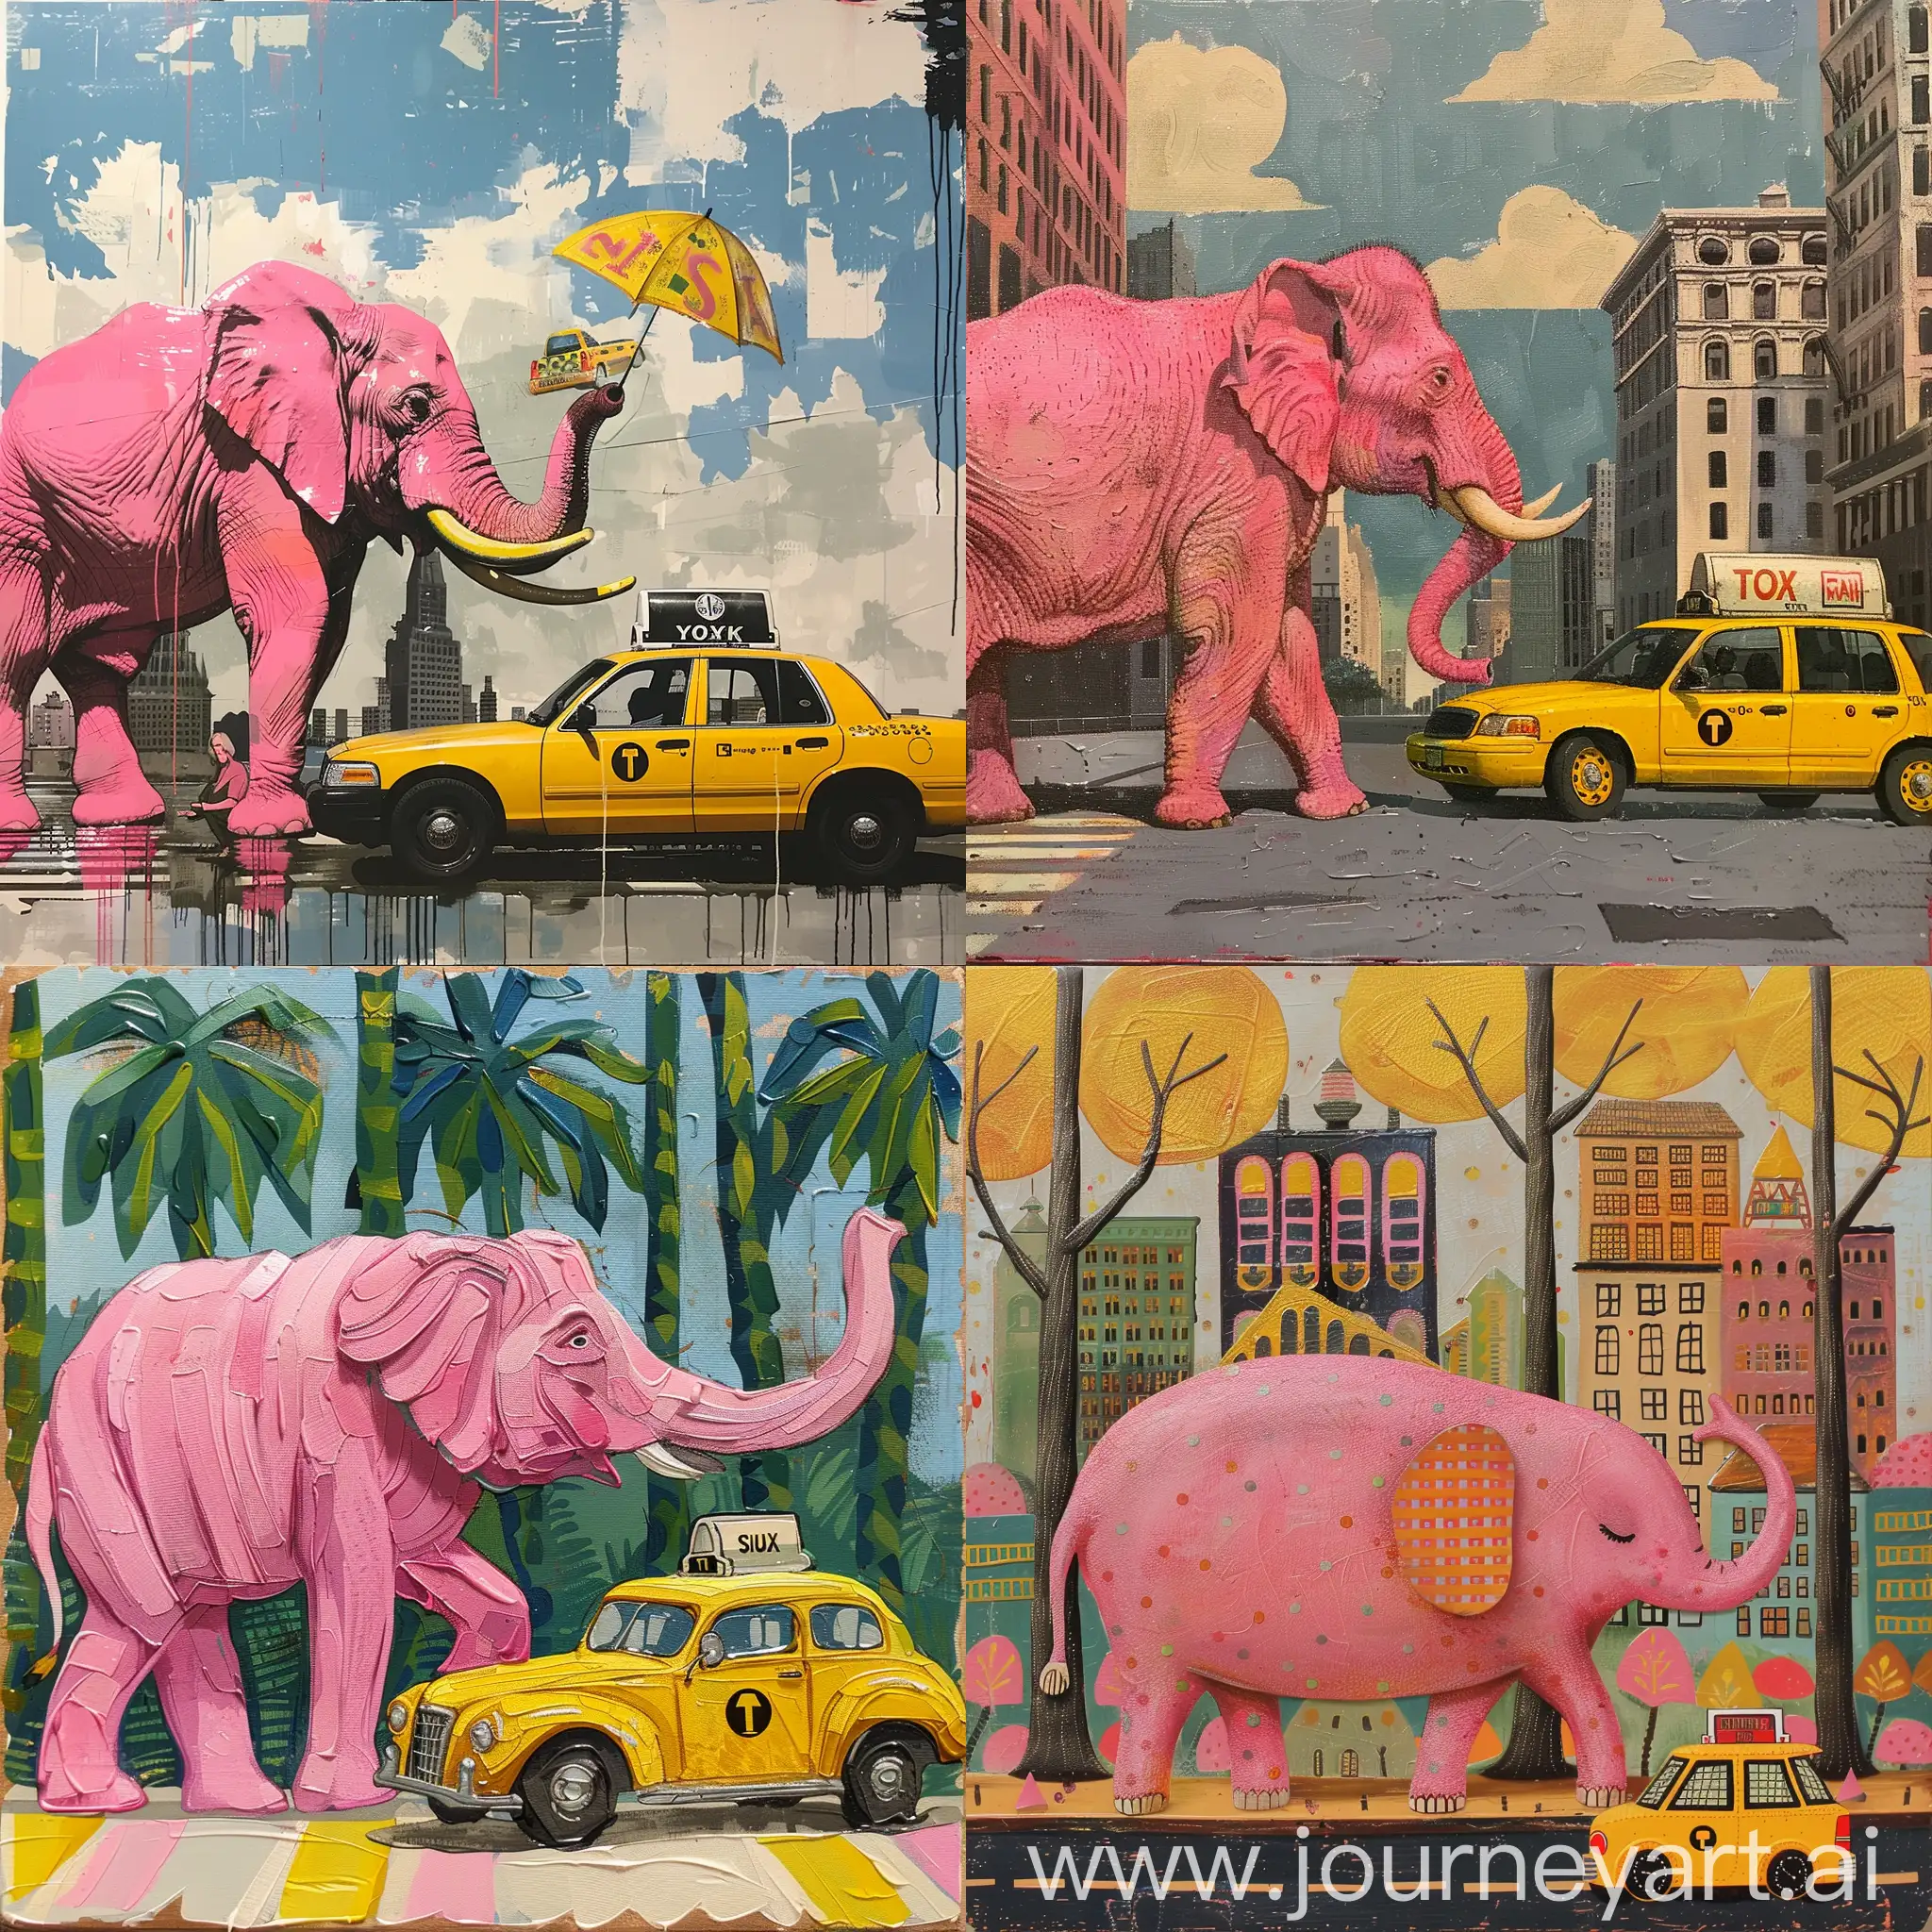 Whimsical-Pink-Elephant-and-Yellow-Taxi-in-Urban-Setting